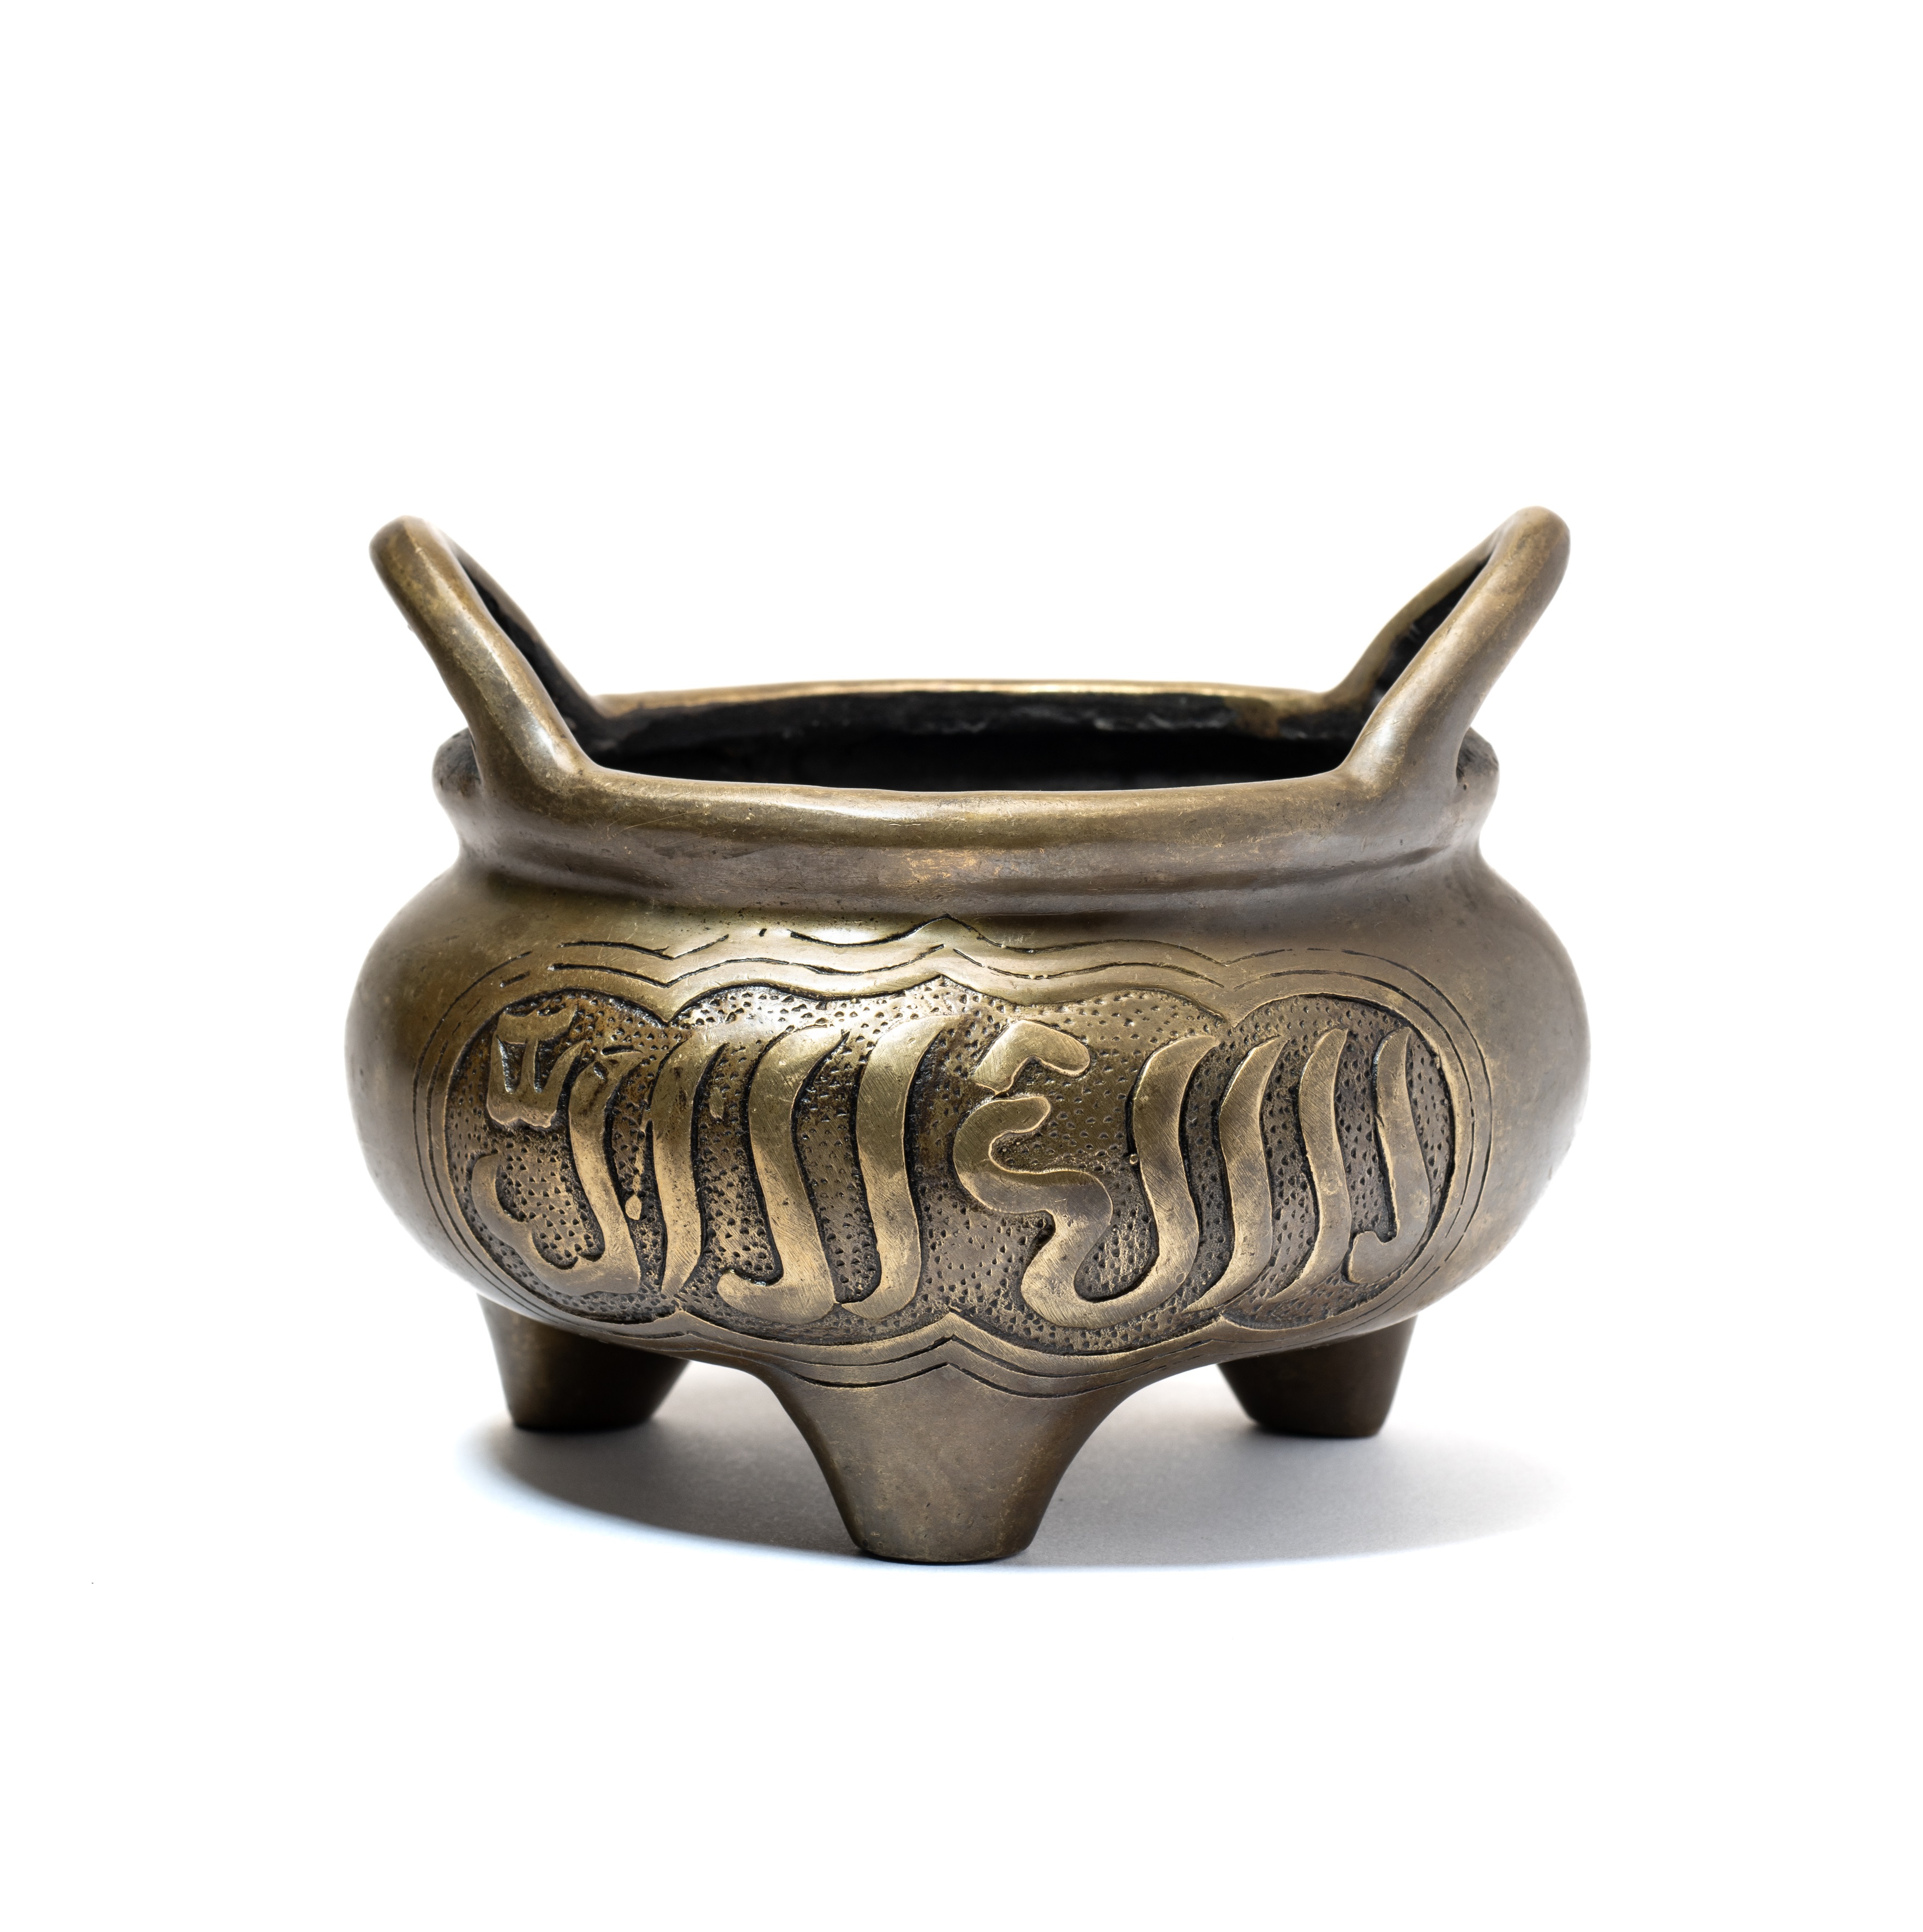 A CHINESE BRONZE TRIPOD CENSER FOR THE ISLAMIC MARKET, QING DYNASTY, 18TH CENTURY